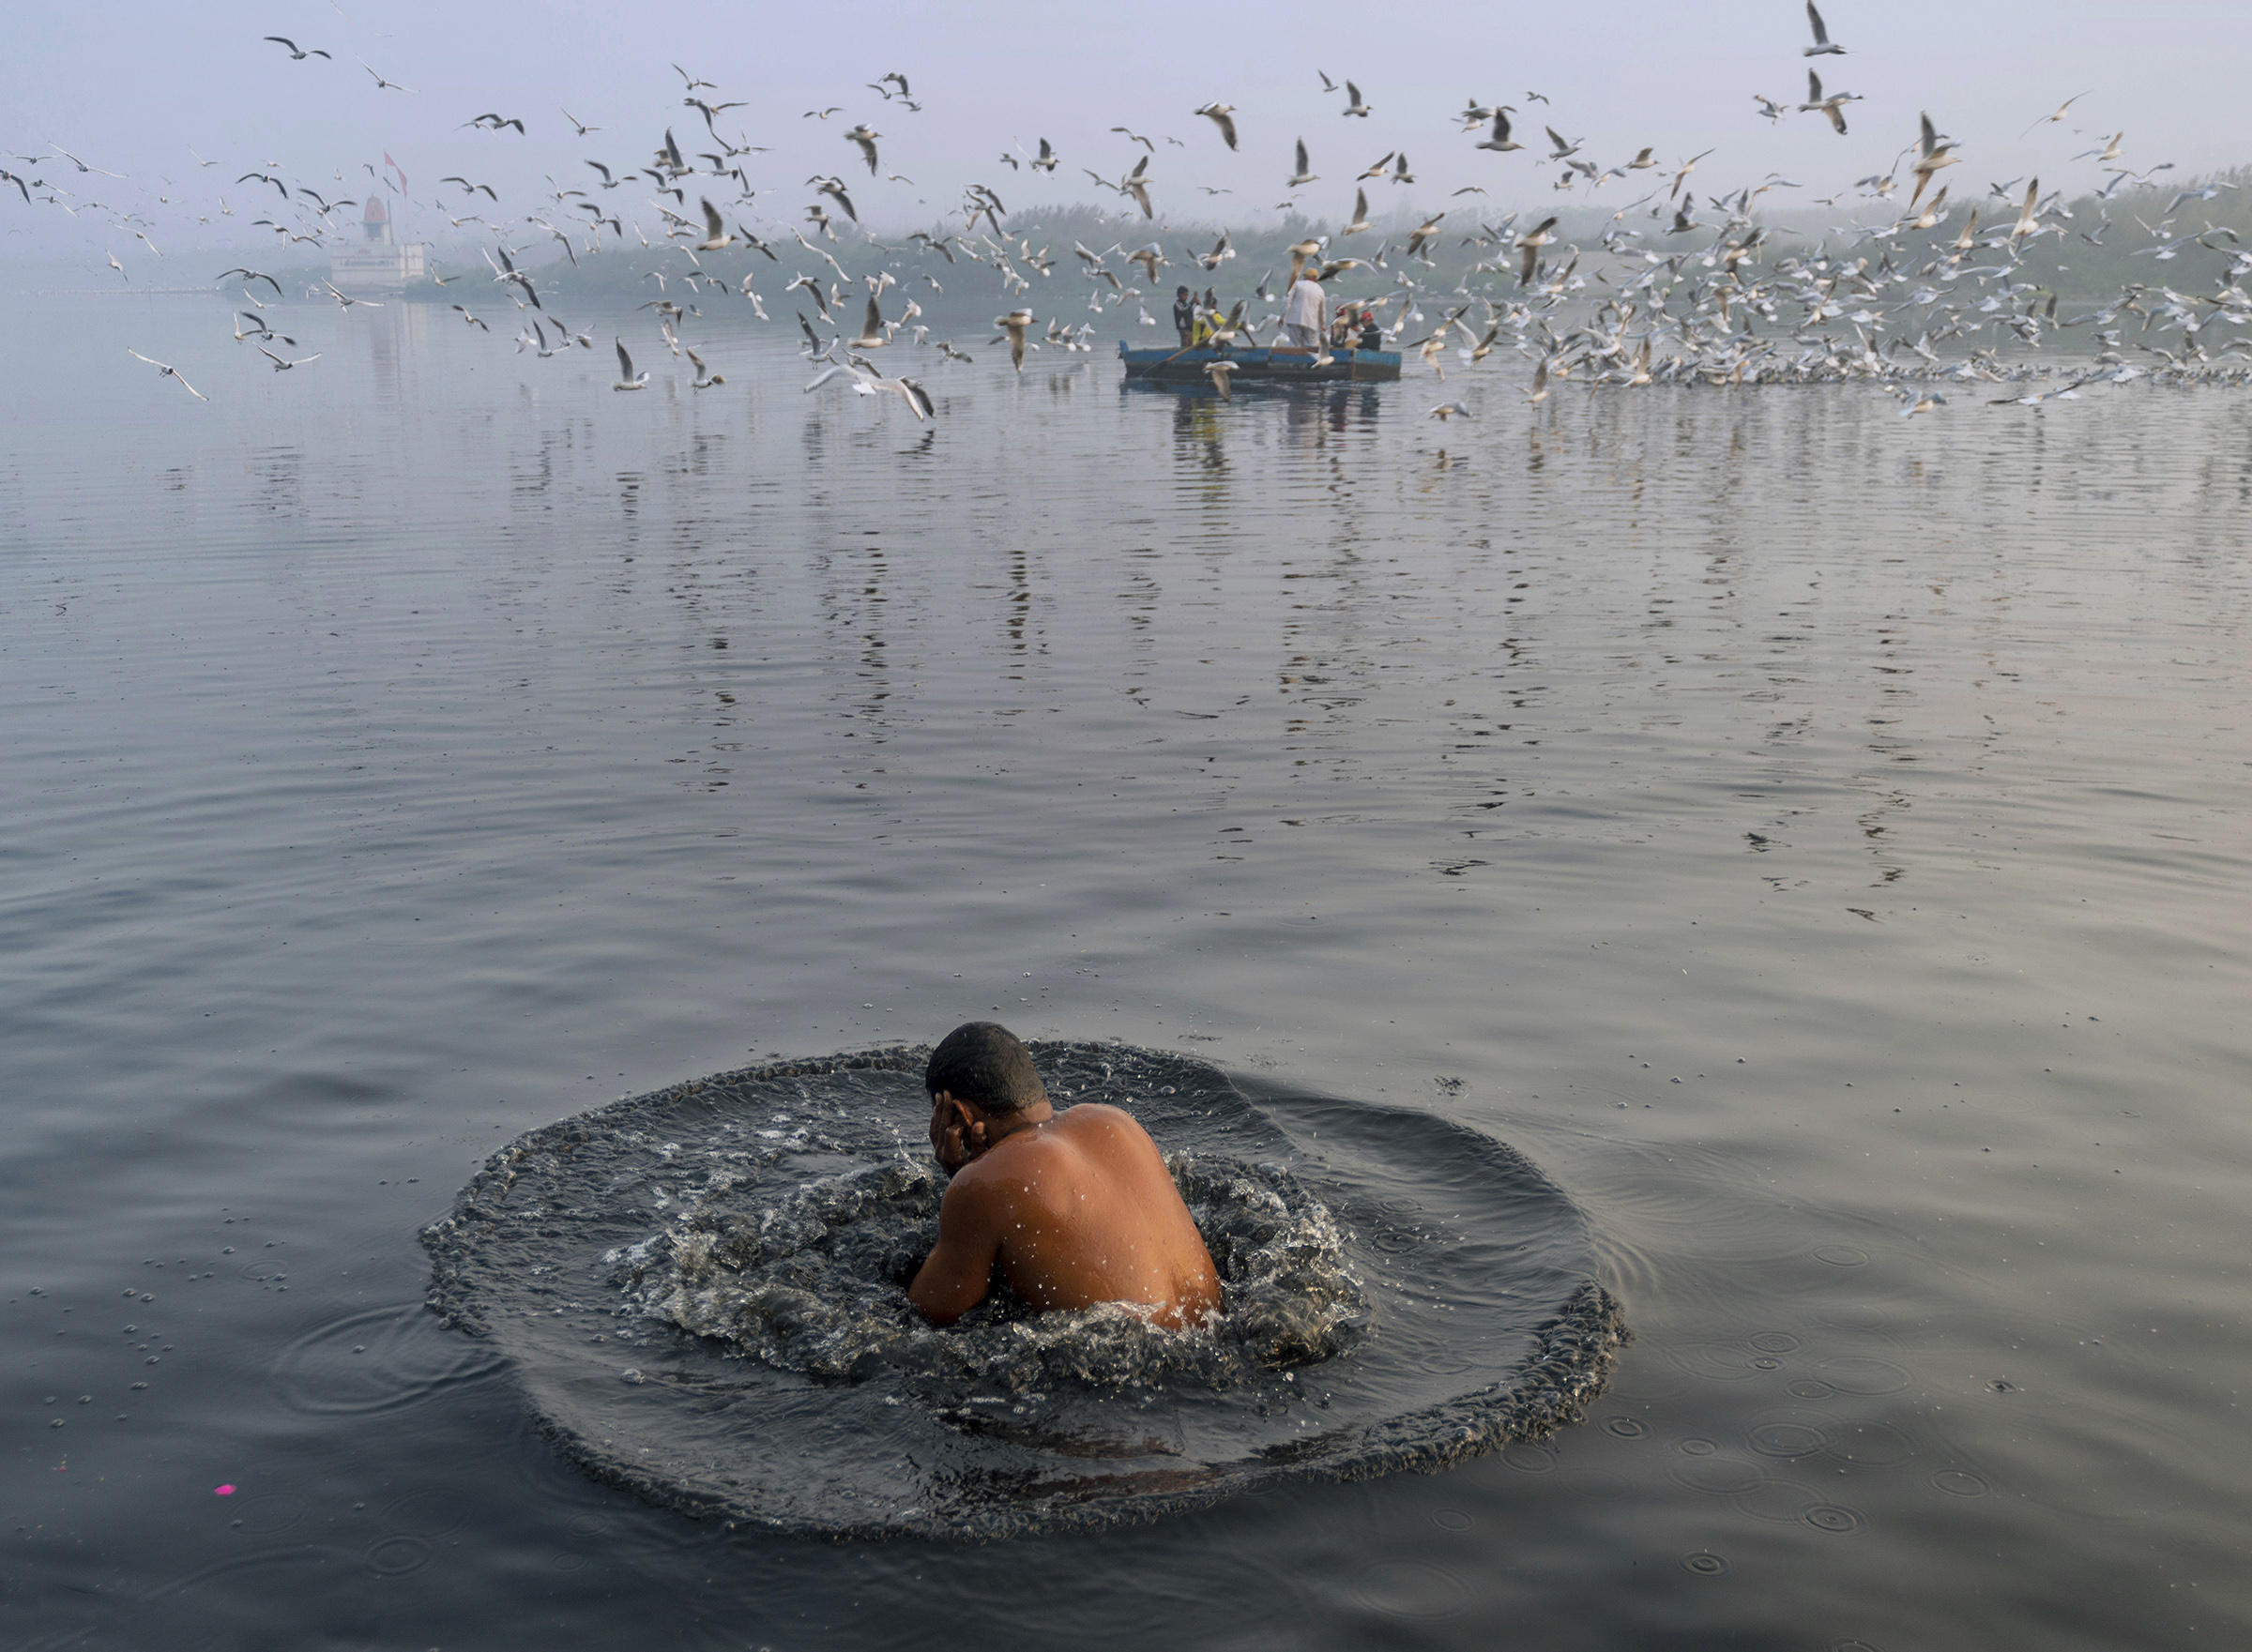 In Hindu mythology just taking a dip in Yamuna’s holy waters is considered to rid you of your sins. A devotee takes a dip in the water despite the fact that the river also doubles as a sewage dump for the city’s waste. This offers an insight into the place it has in people’s heart.